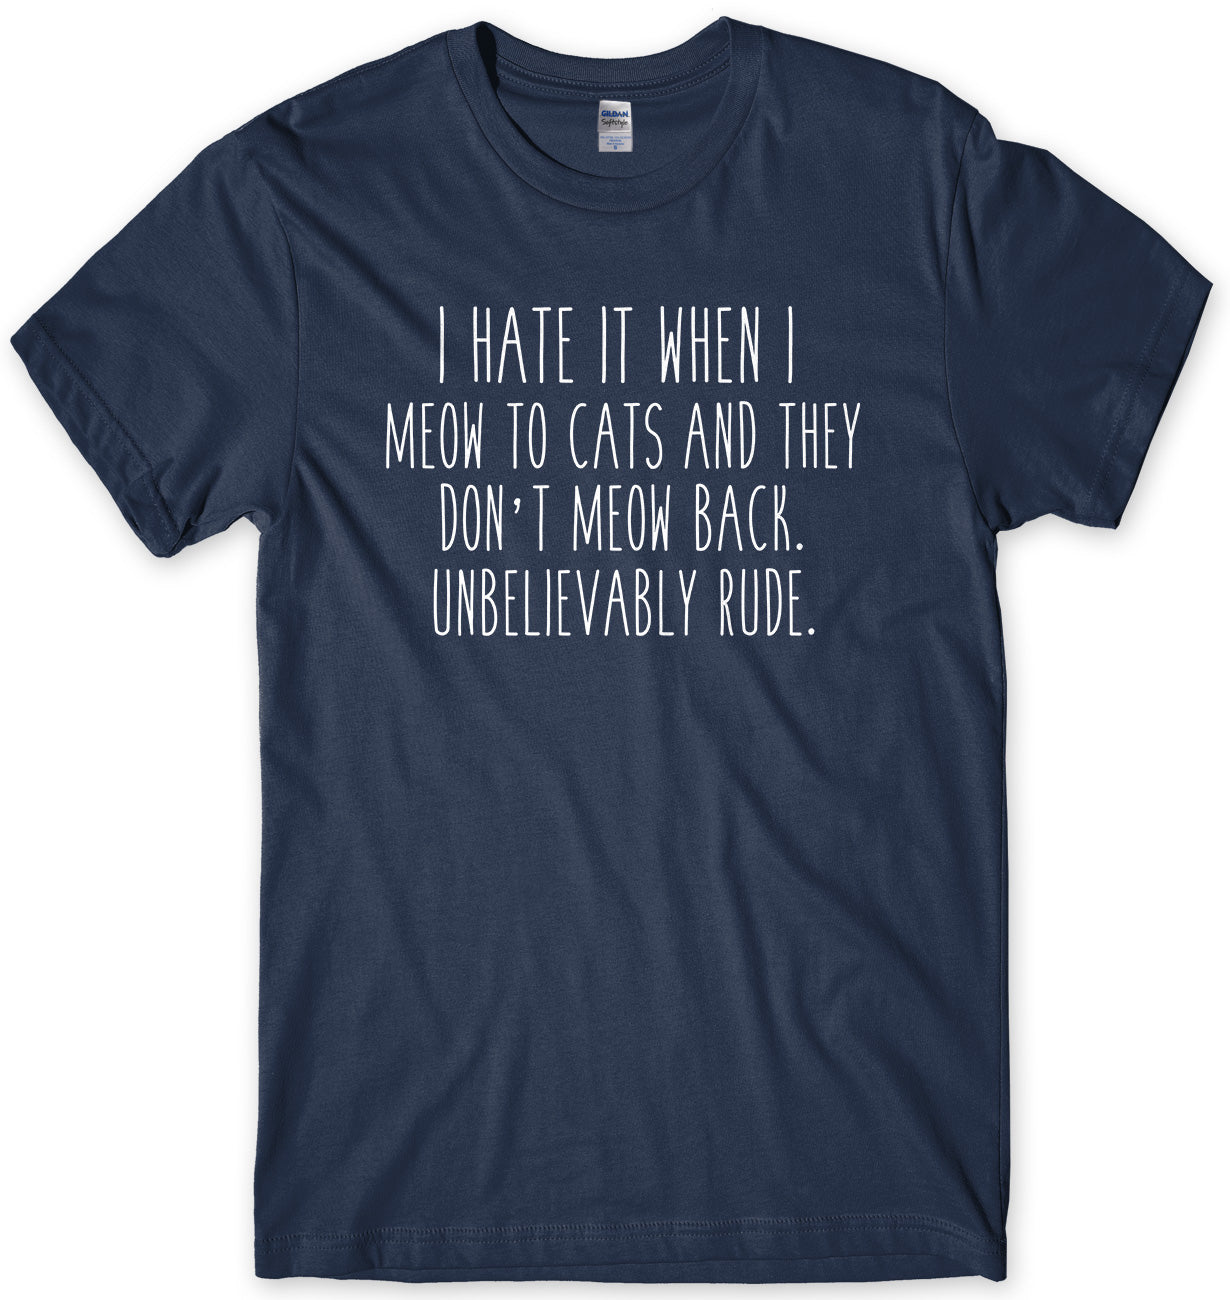 I Hate It When I Meow To Cats And They Don't Meow Back. Unbelievably Rude Mens Unisex T-Shirt